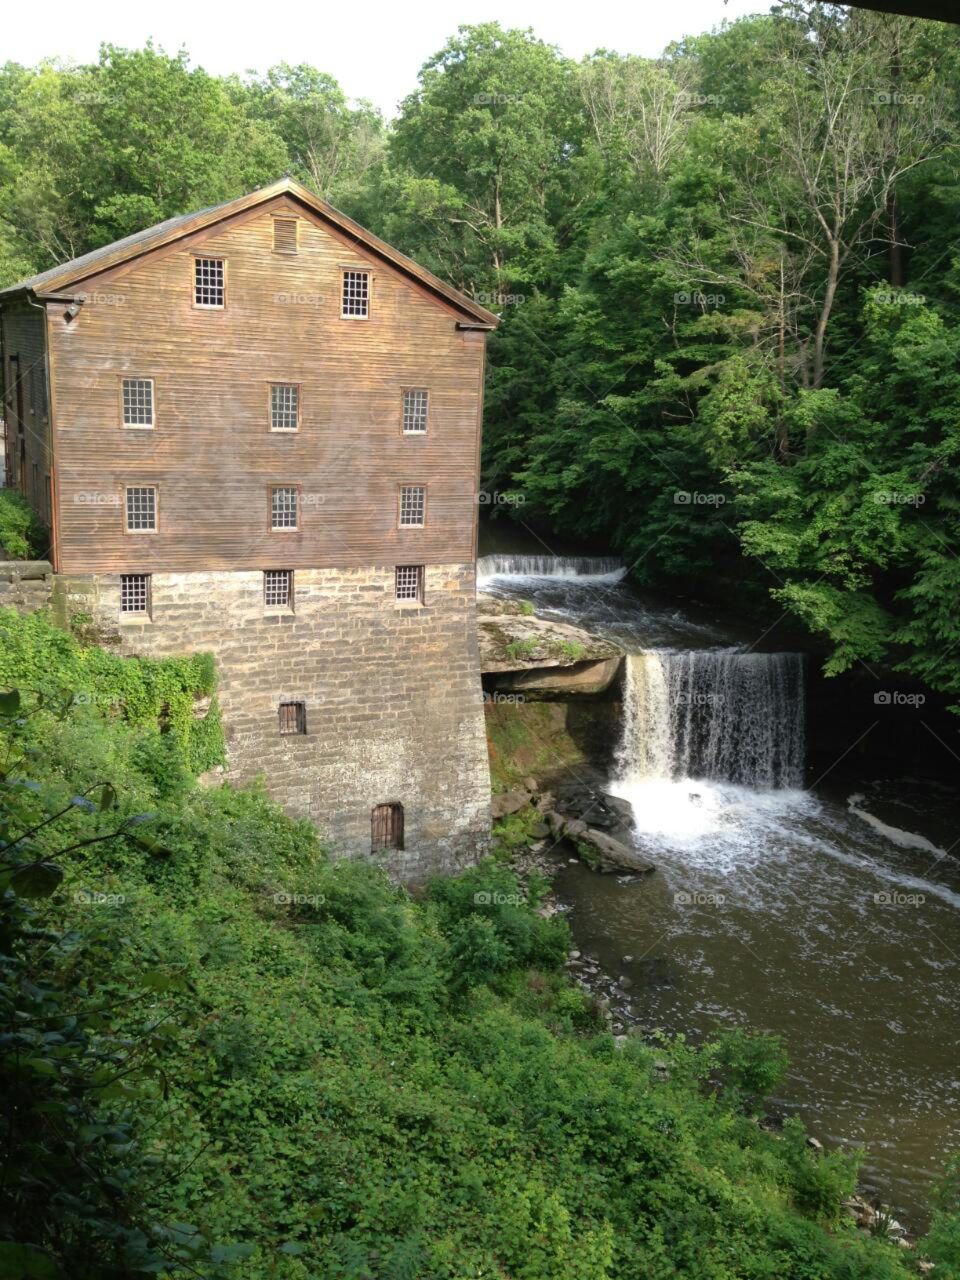 the old mill. this is by my dads house where i grew up